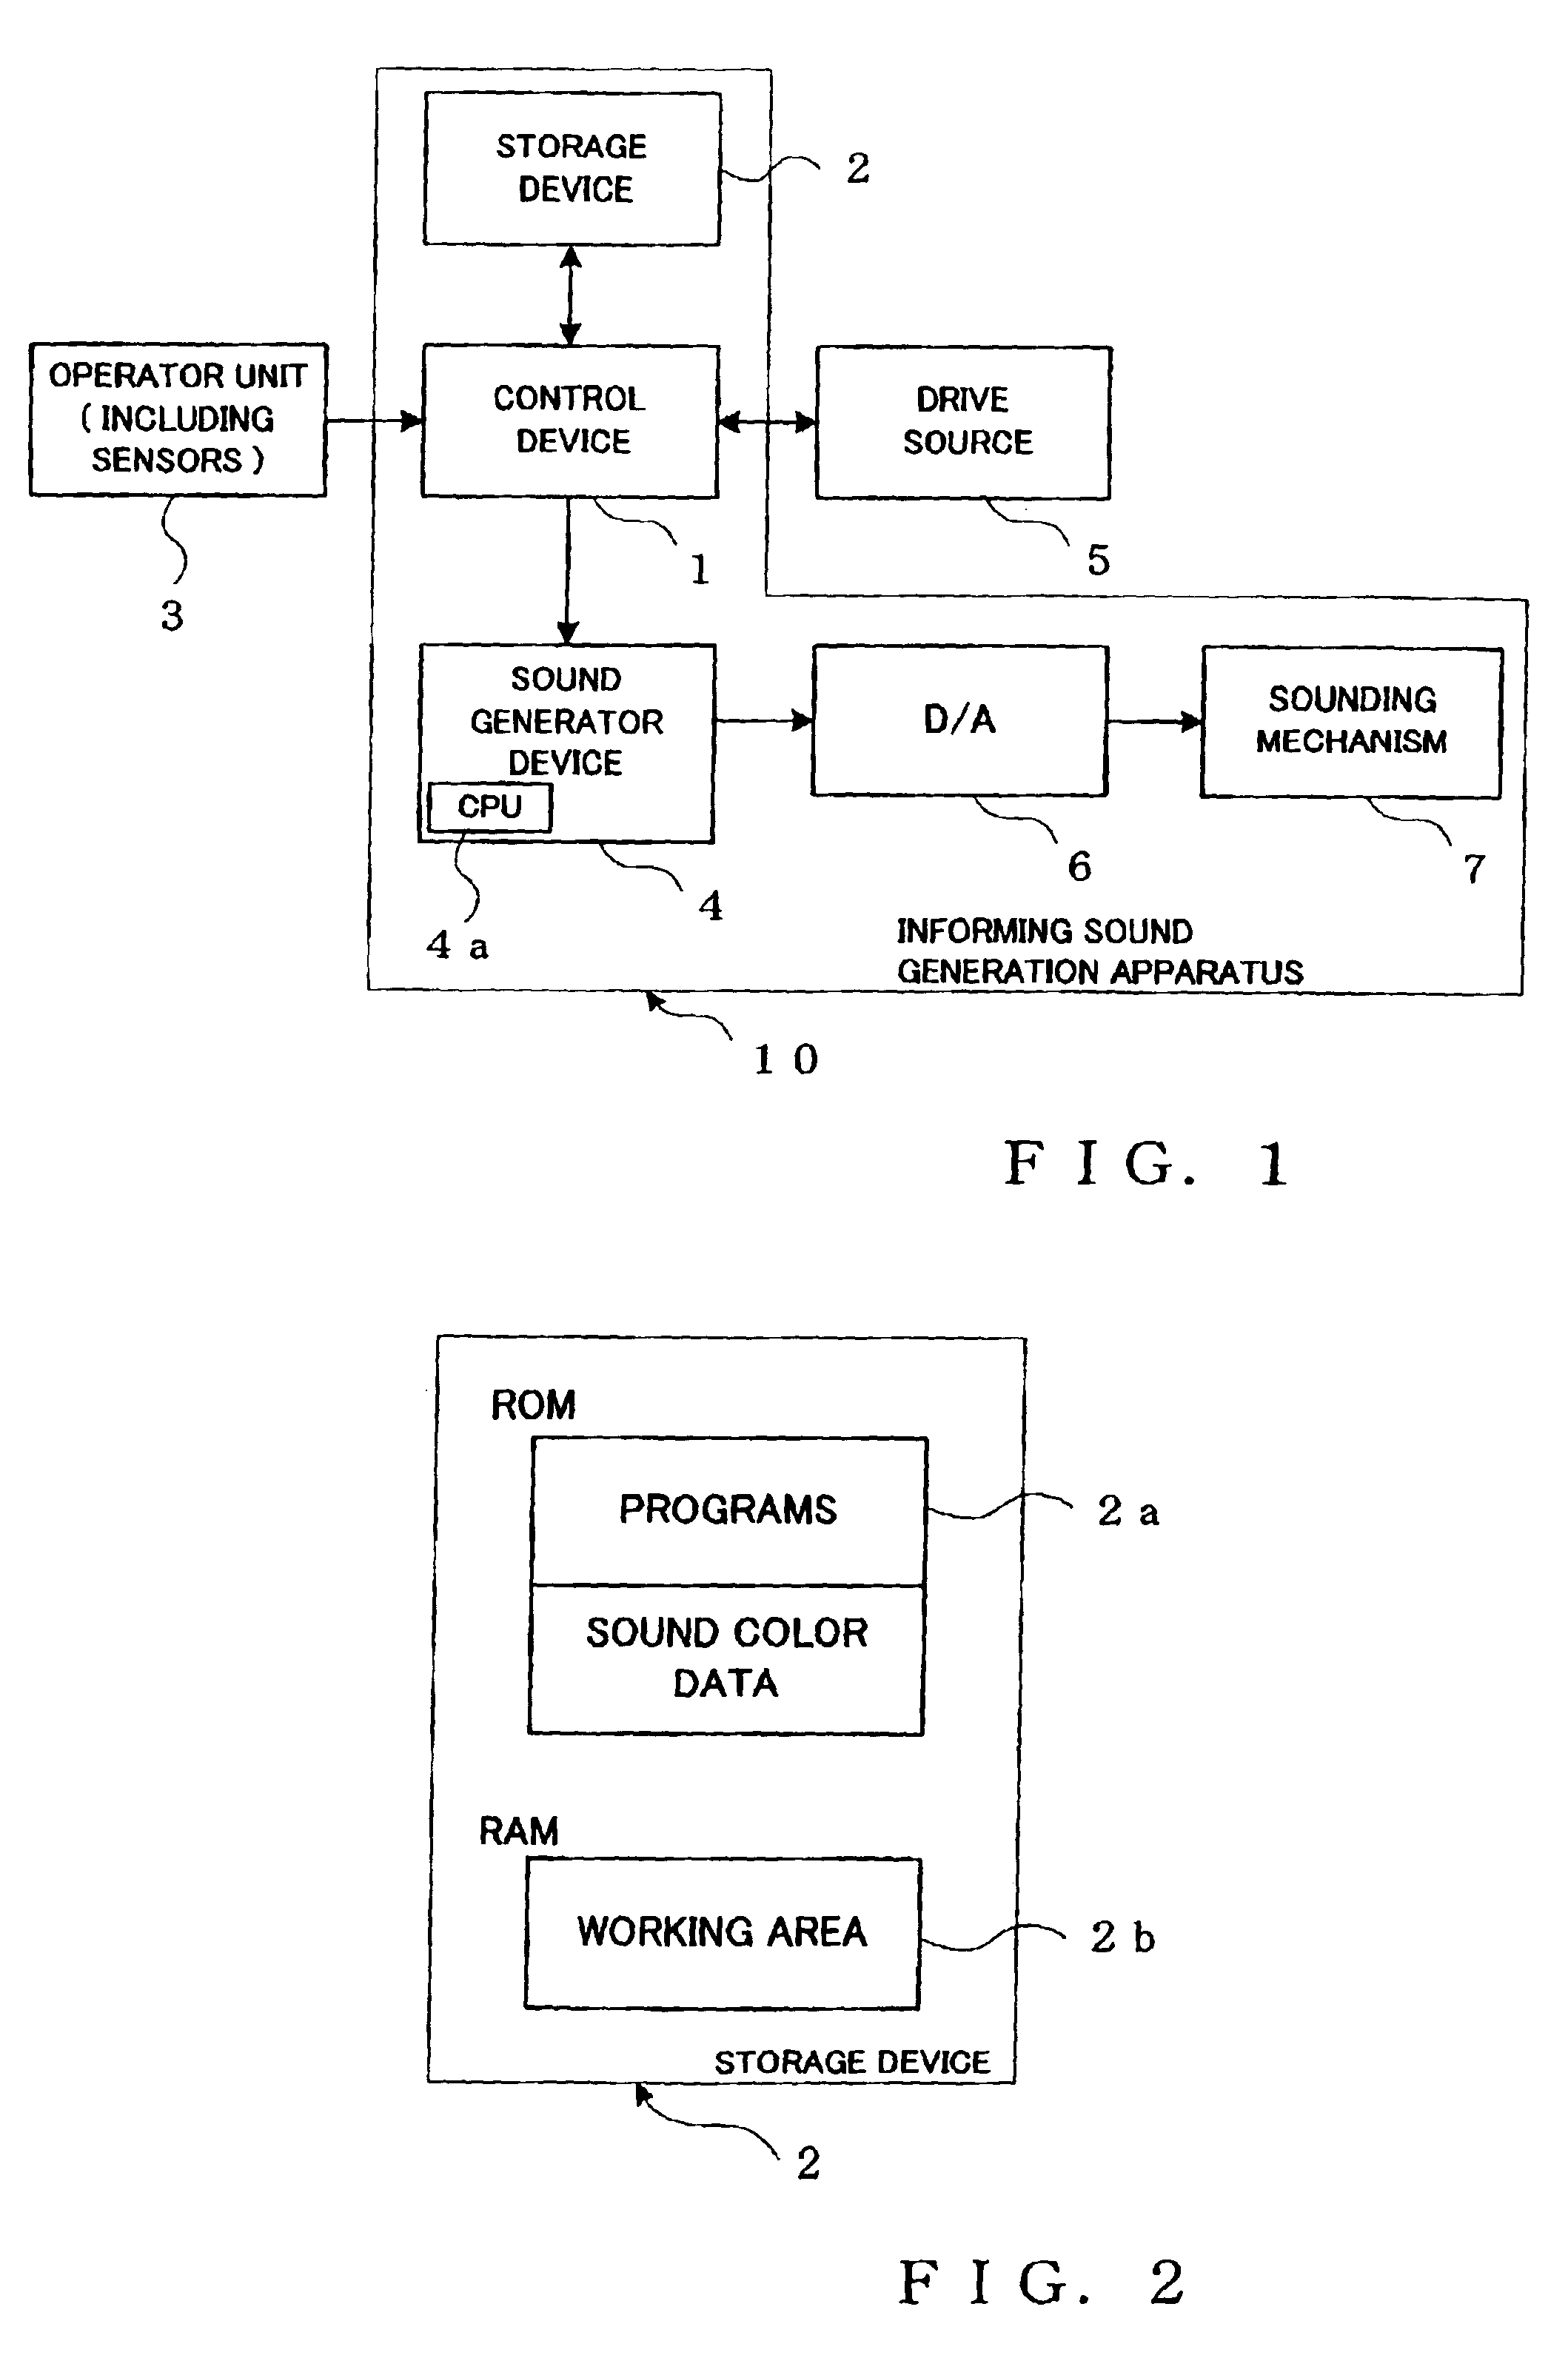 Informing sound generation method and apparatus for vehicle